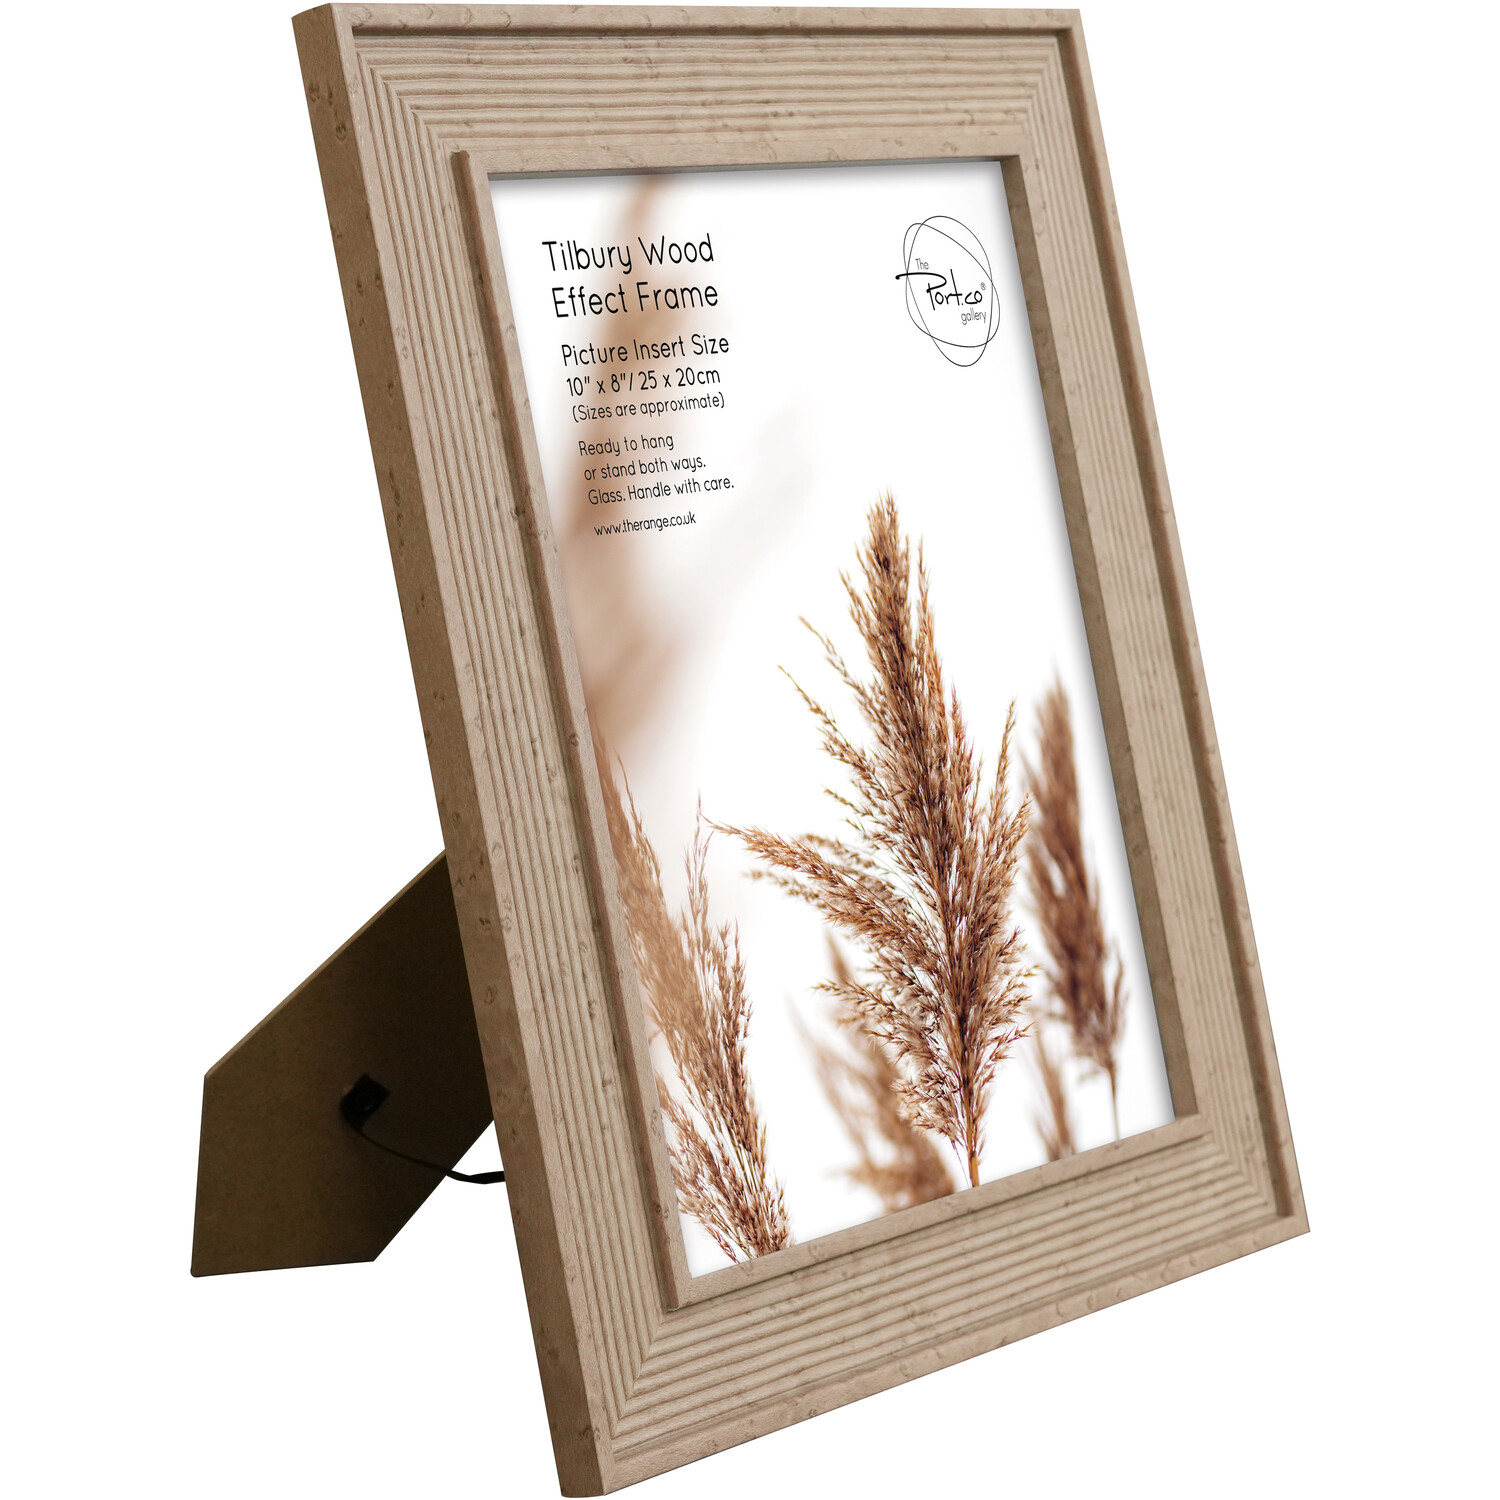 The Port. Co Gallery Tilbury Wood Effect Photo Frame 10 x 8 inch Image 2